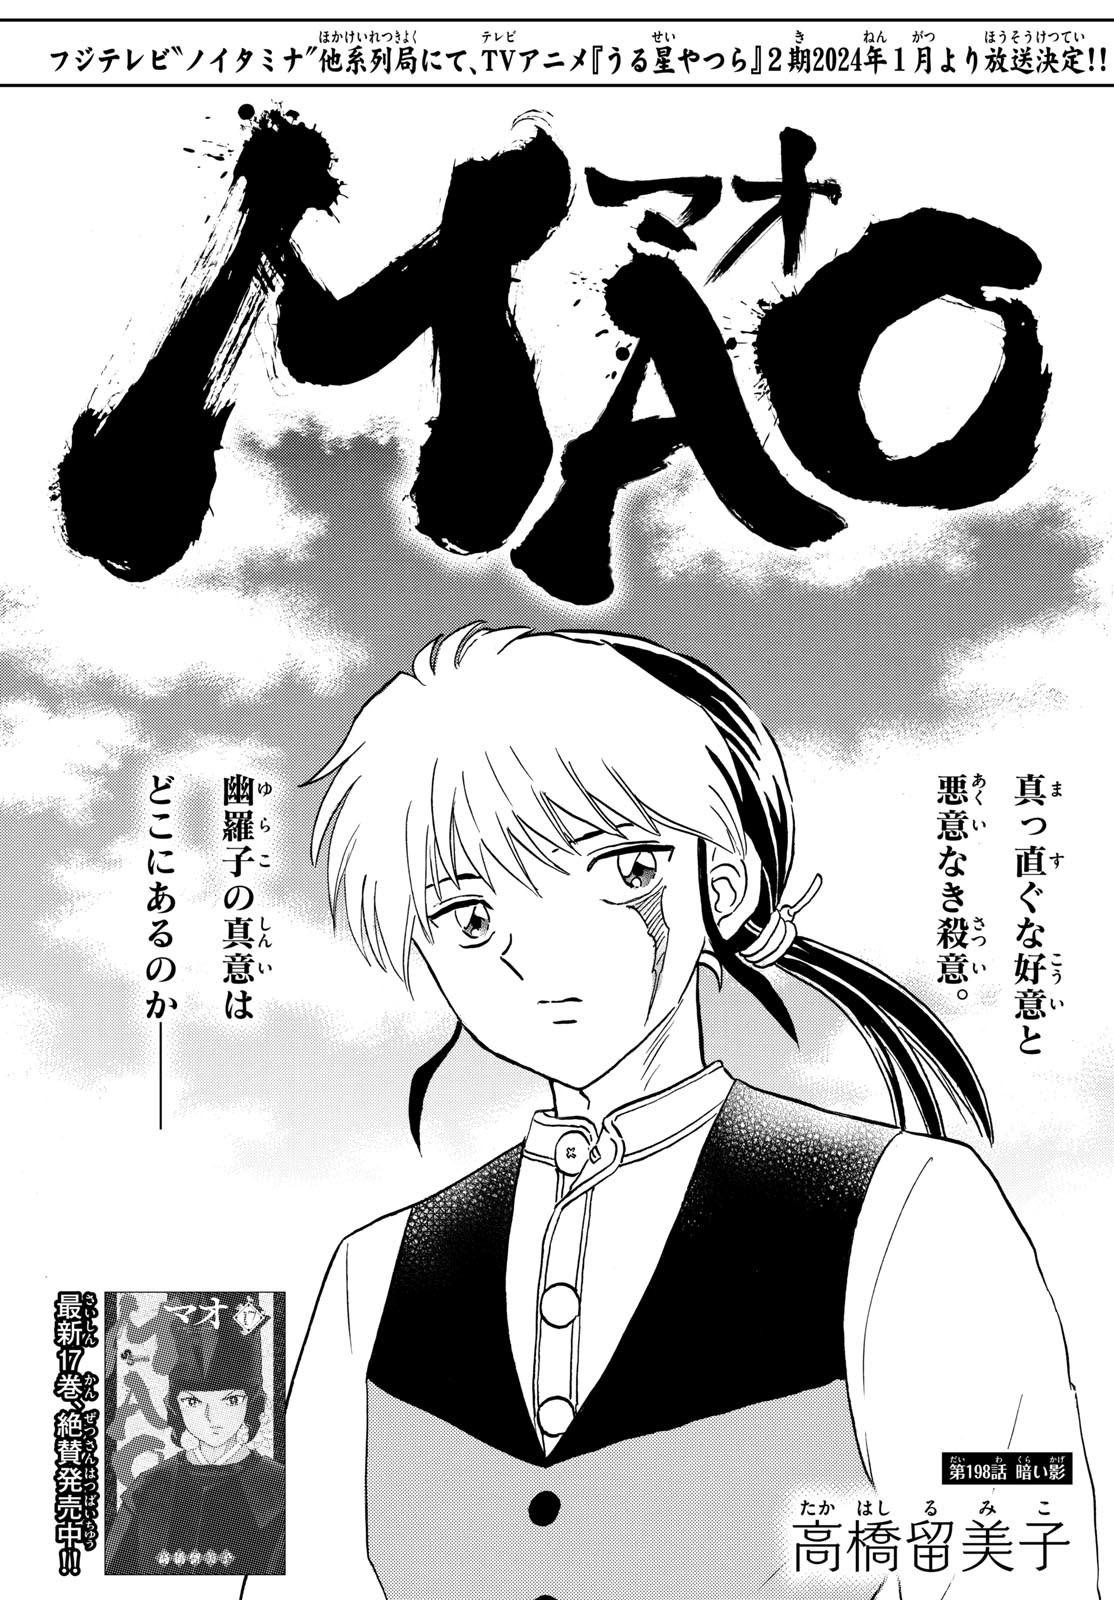 MAO - Chapter 198 - Page 1